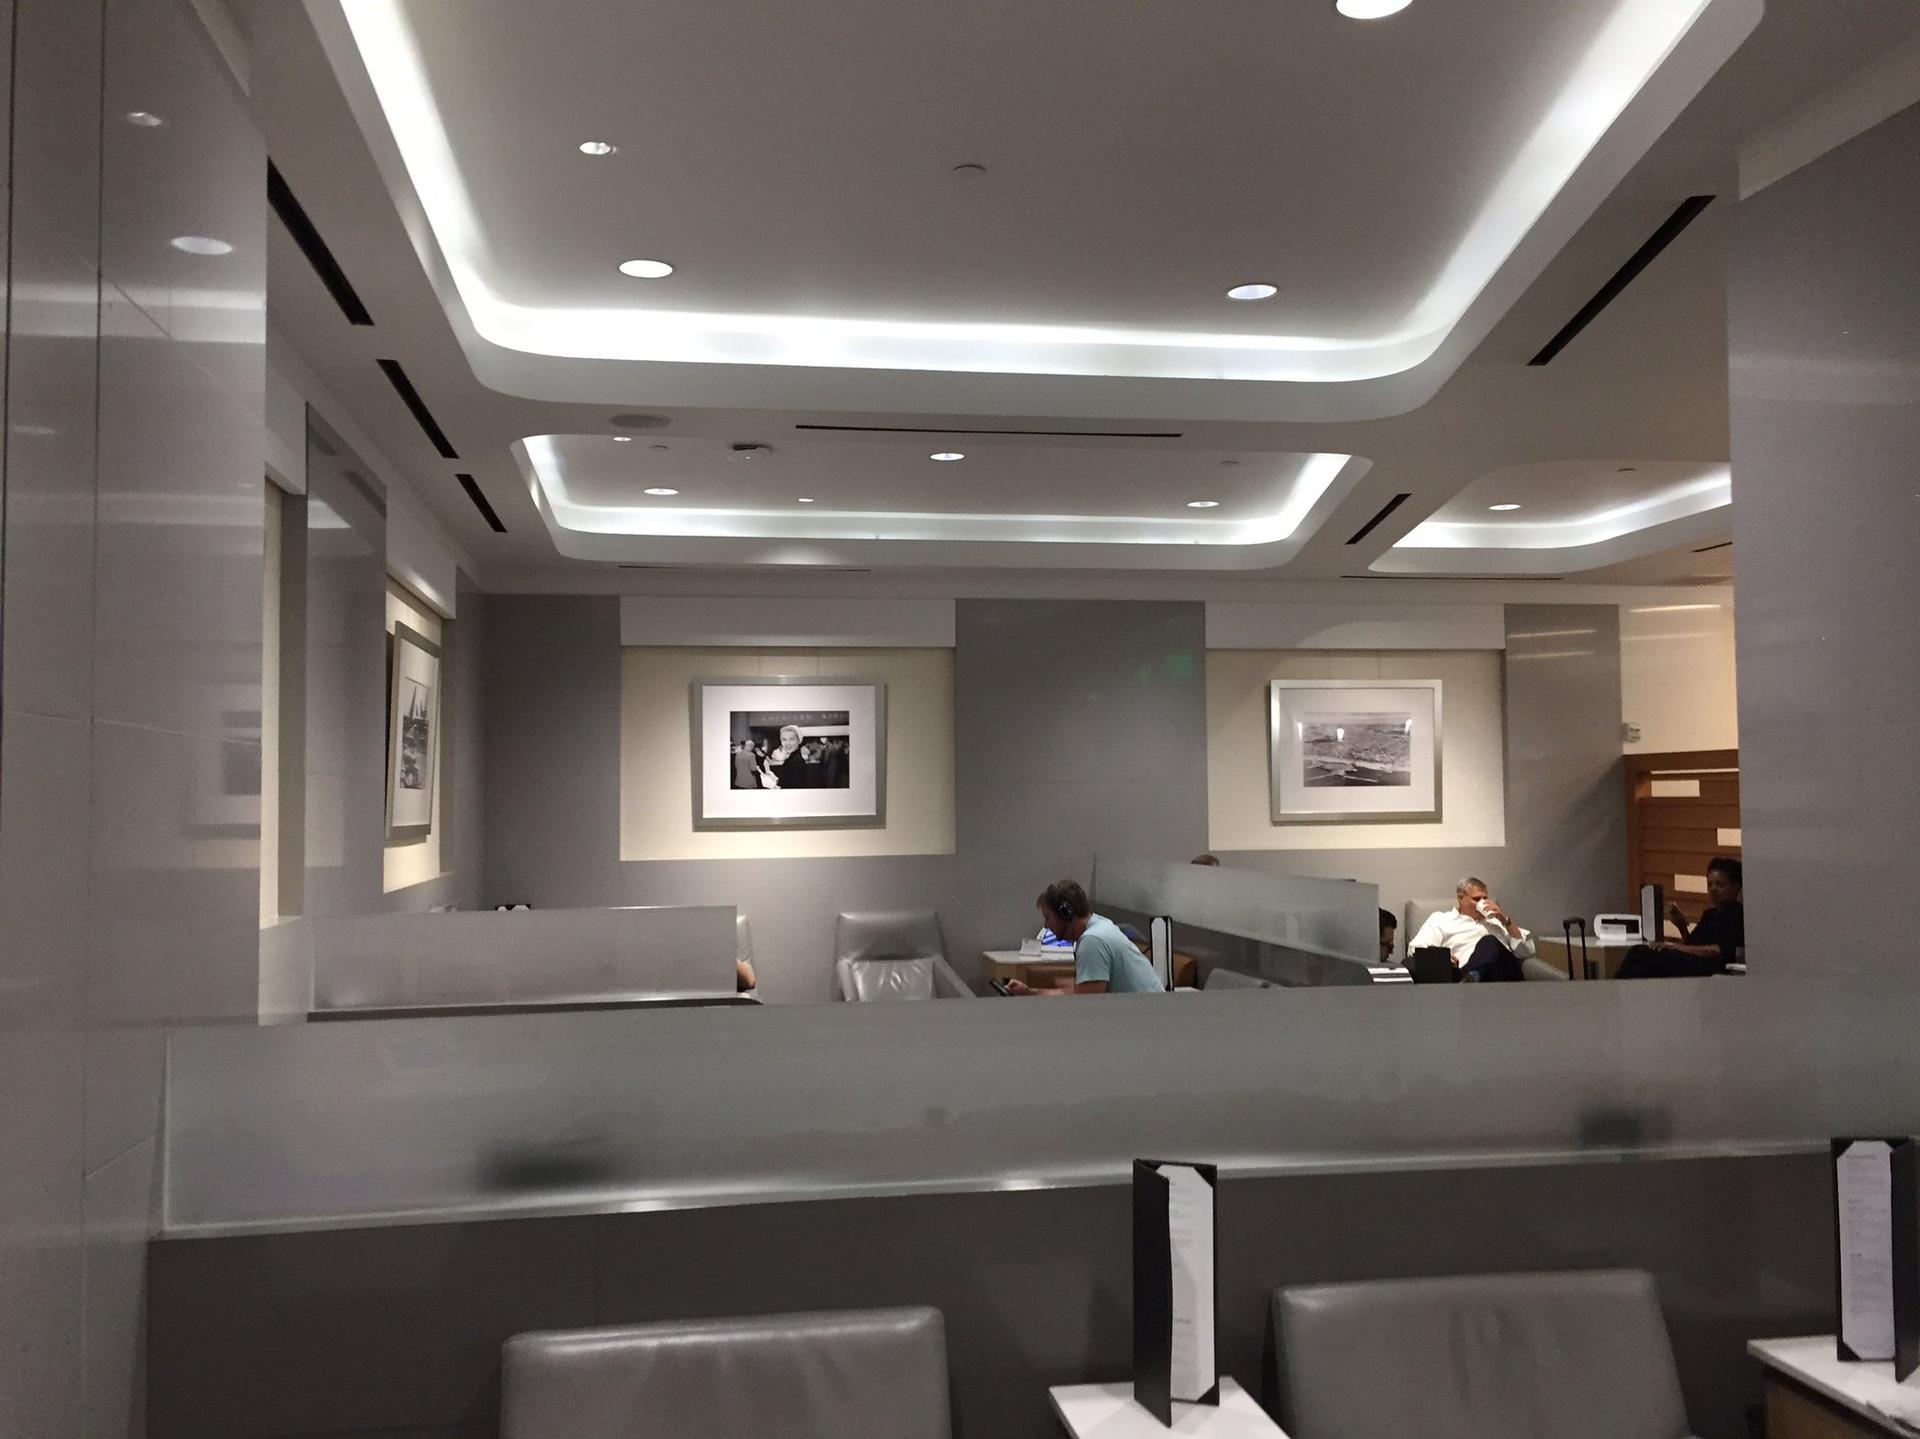 American Airlines Admirals Club image 28 of 43